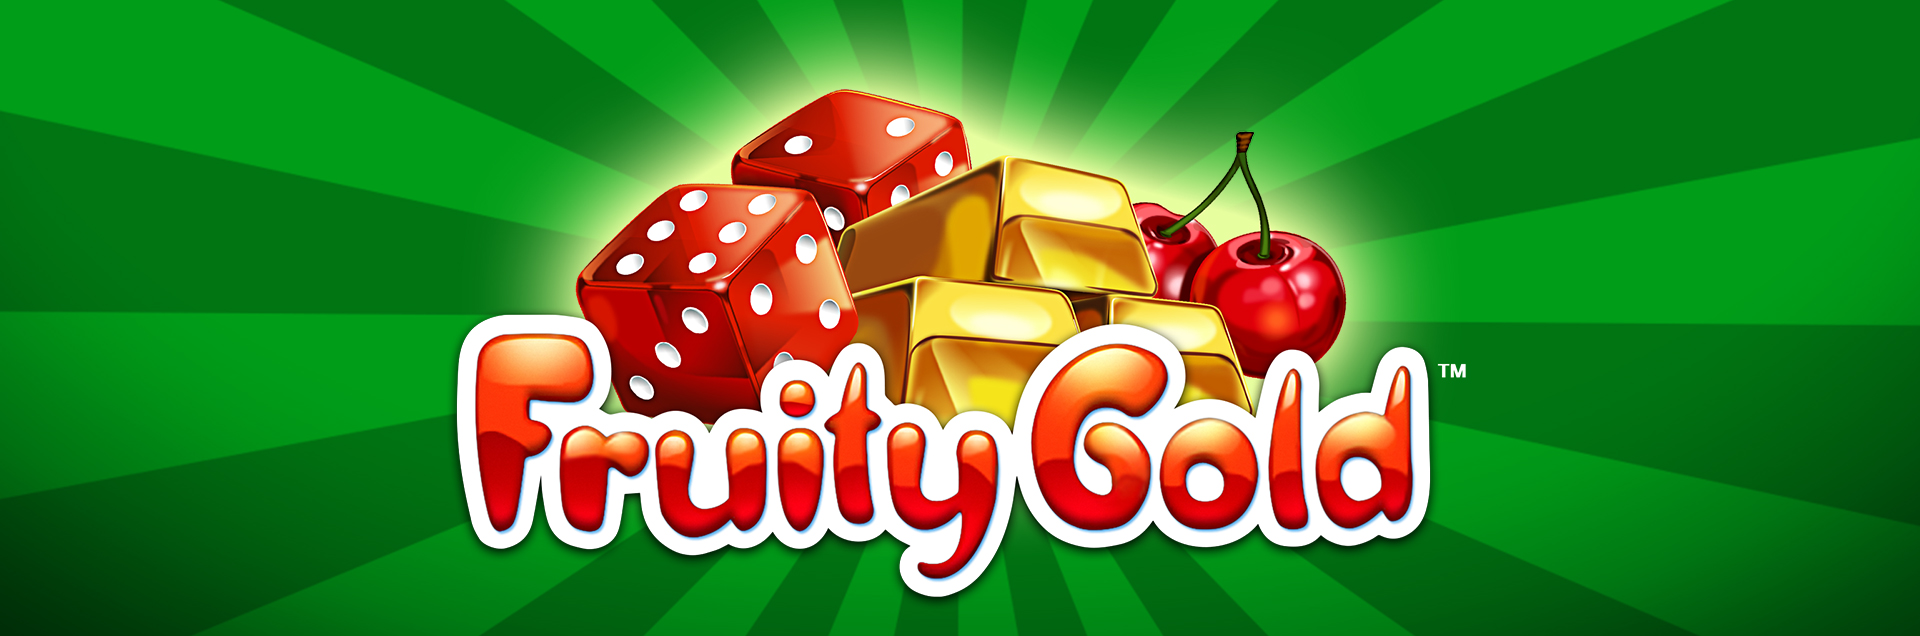 Fruity Gold Homepage Header Games